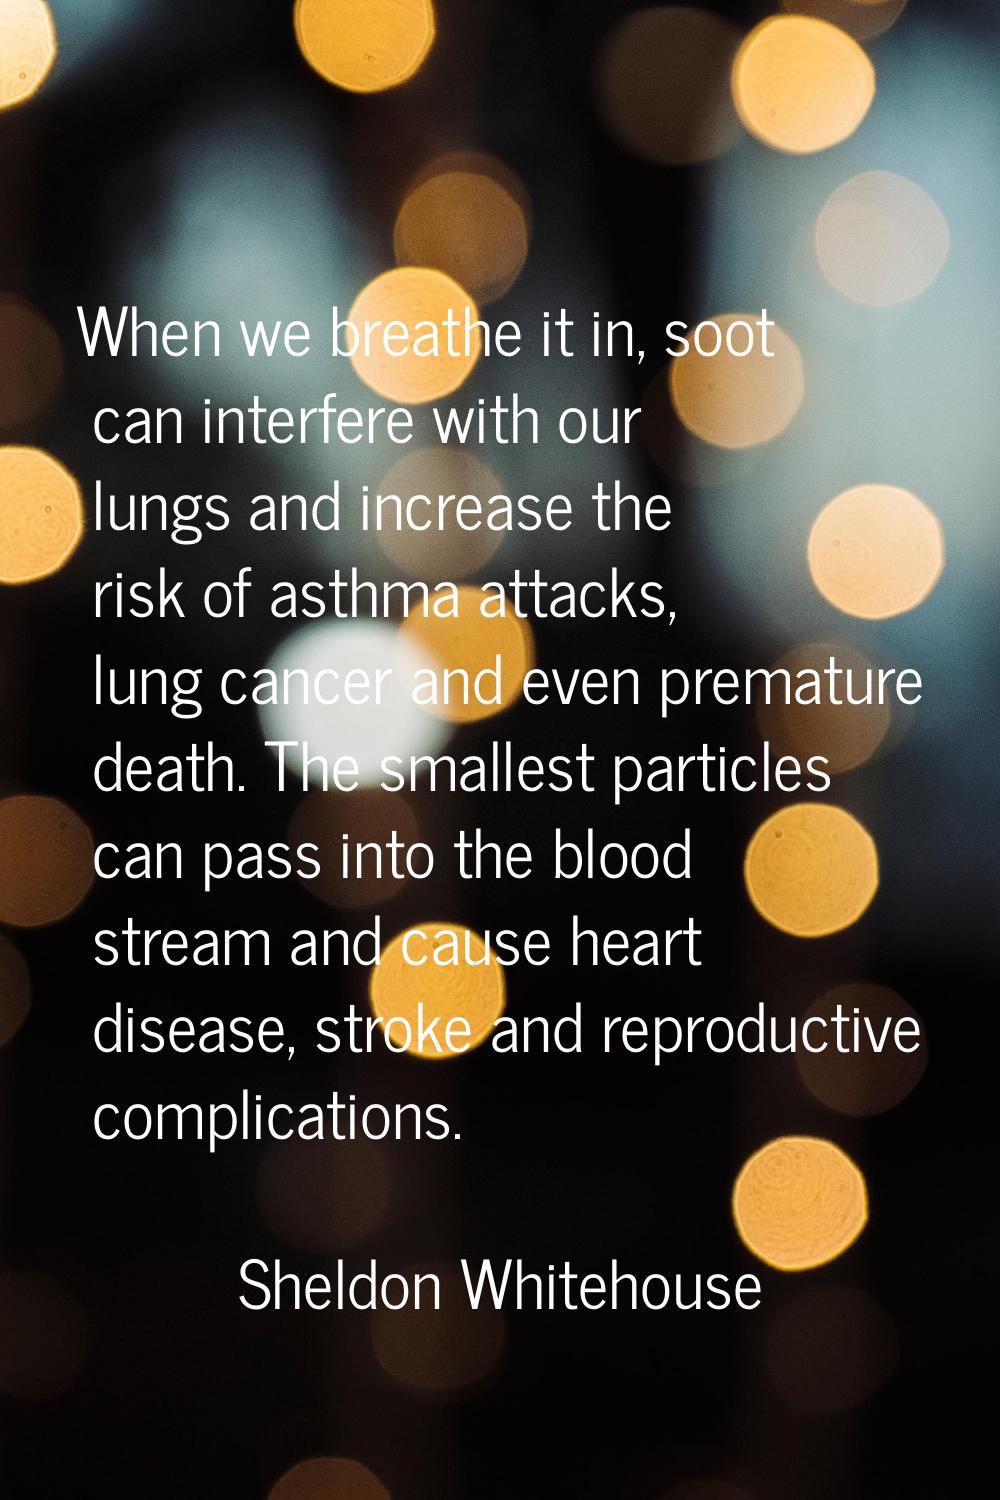 When we breathe it in, soot can interfere with our lungs and increase the risk of asthma attacks, l